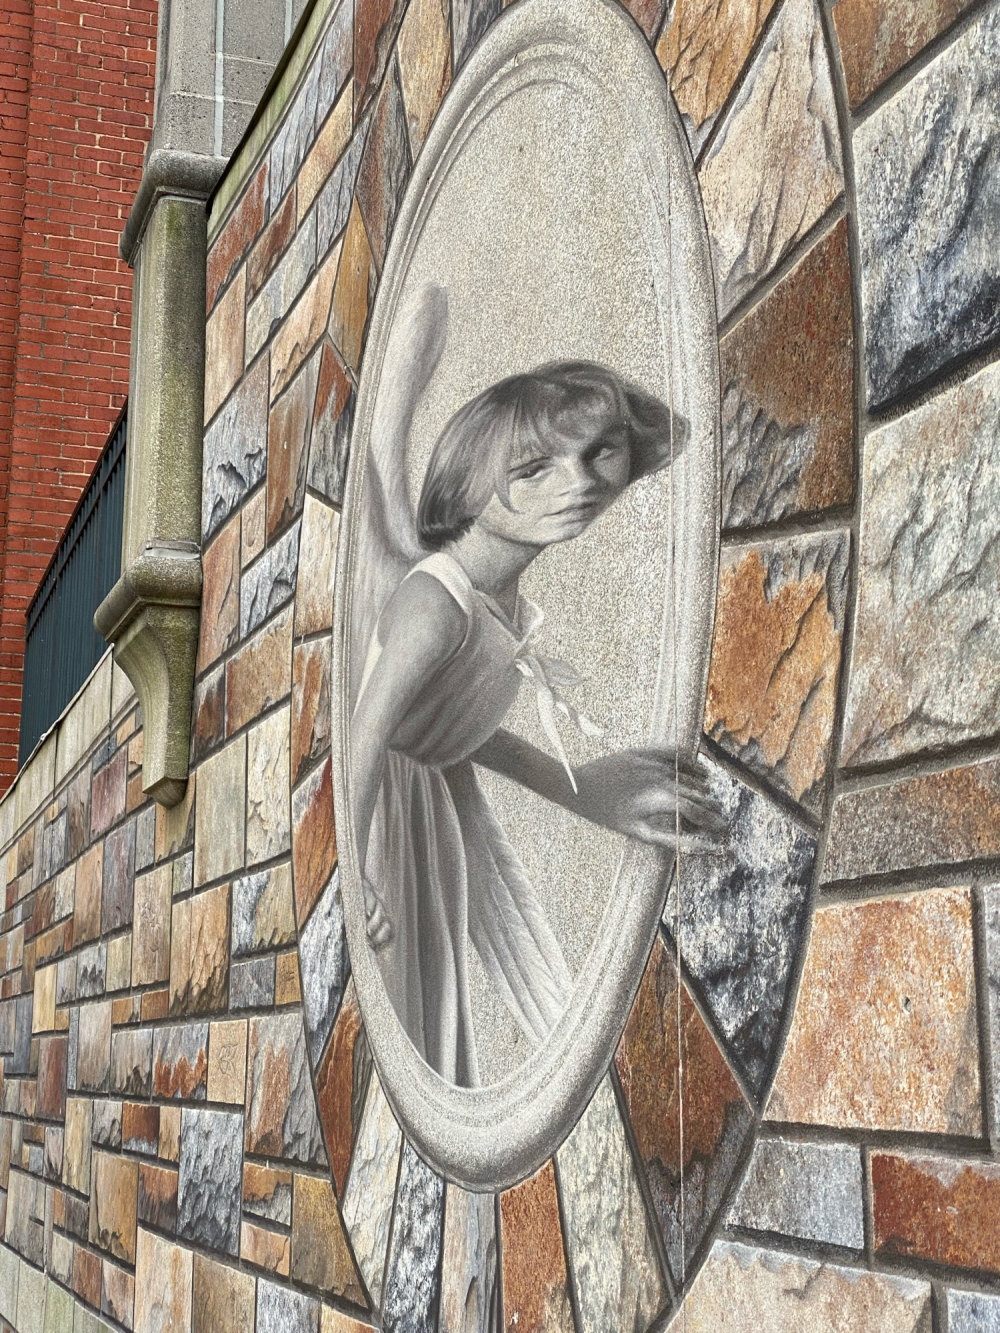 mural in Frederick by artist unknown.